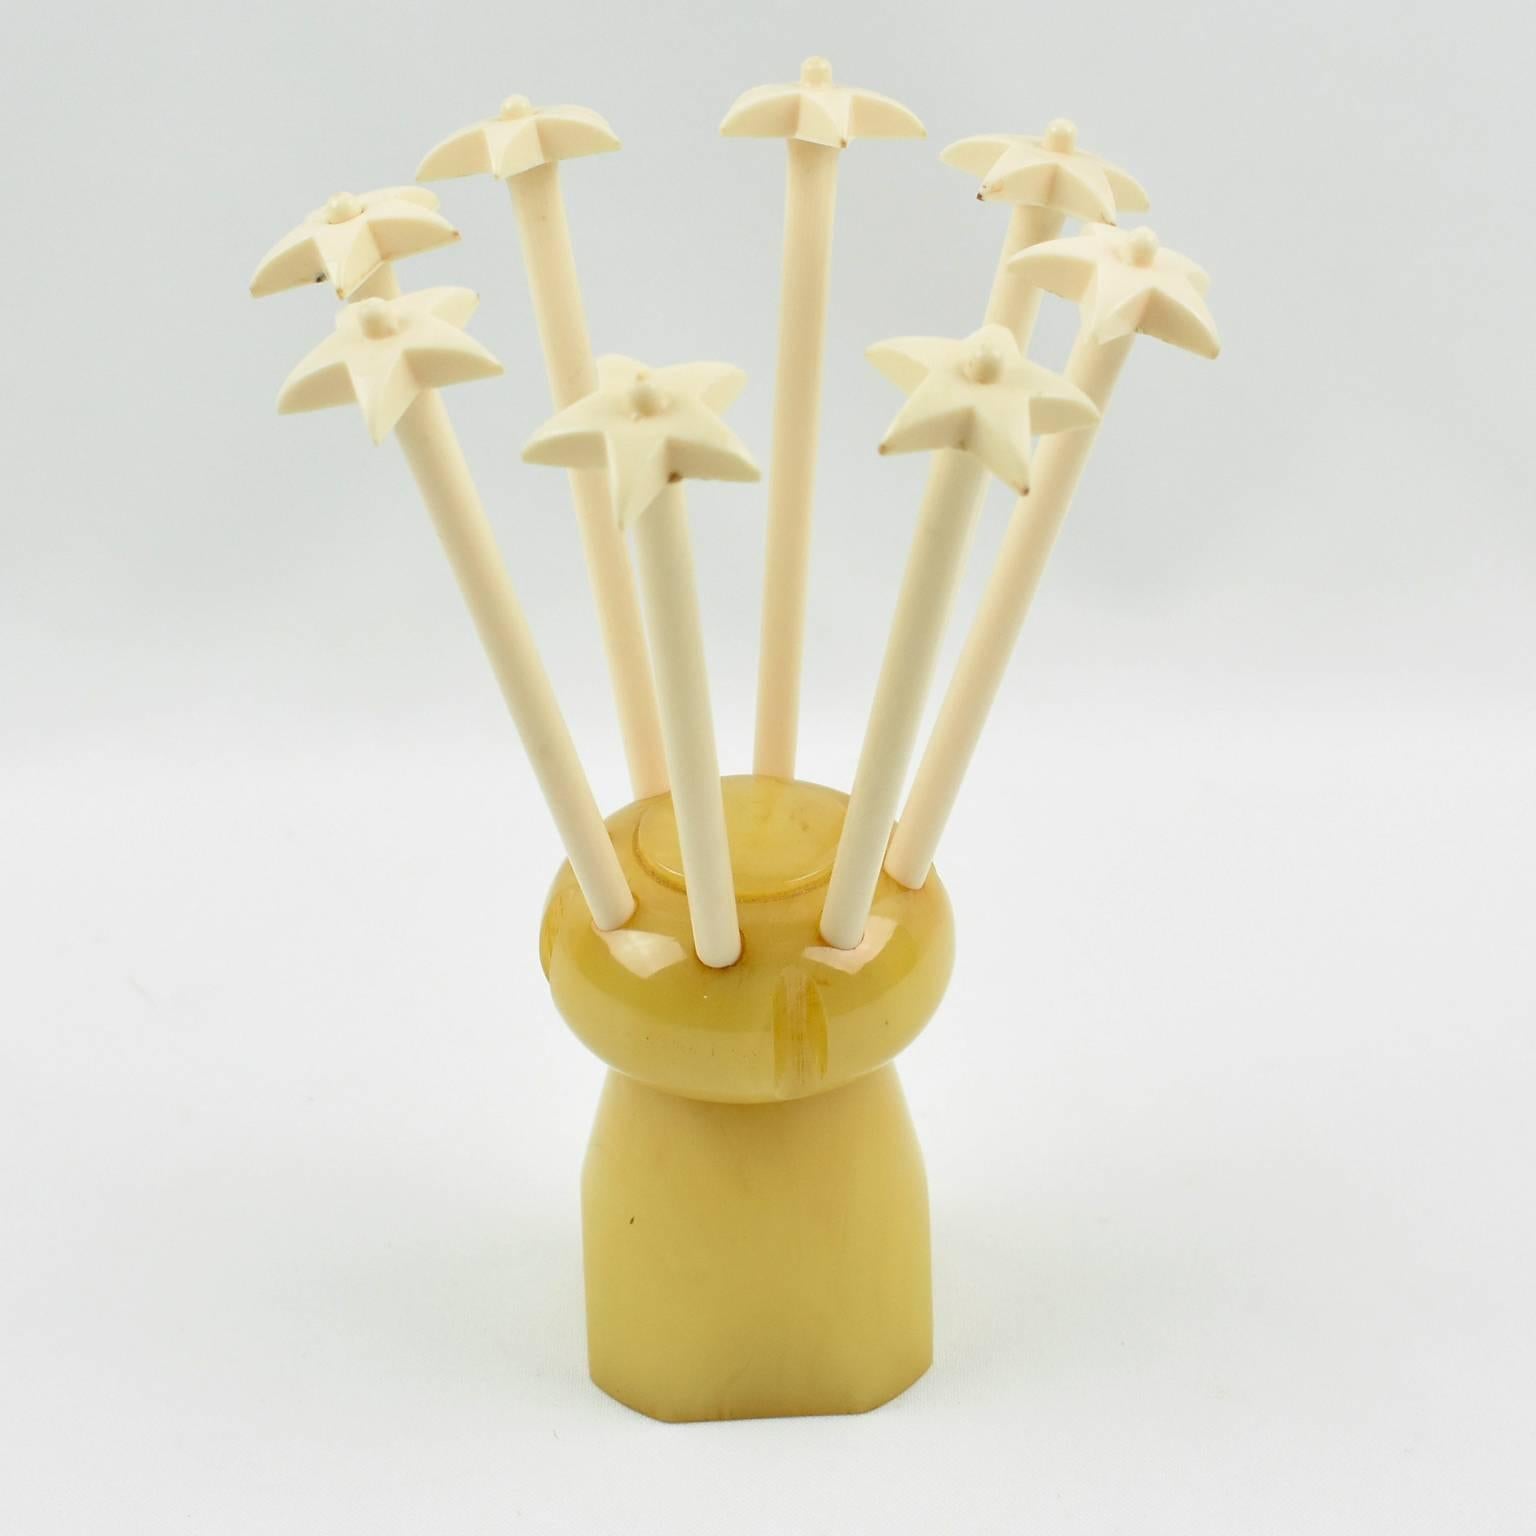 Rare French barware bar set cocktail stirrers. This French Art Deco bar set is build with lemon yellow marble bakelite featuring a huge champagne cork holder with eight long off-white plastic stir sticks with star finial. This set is very stylish -